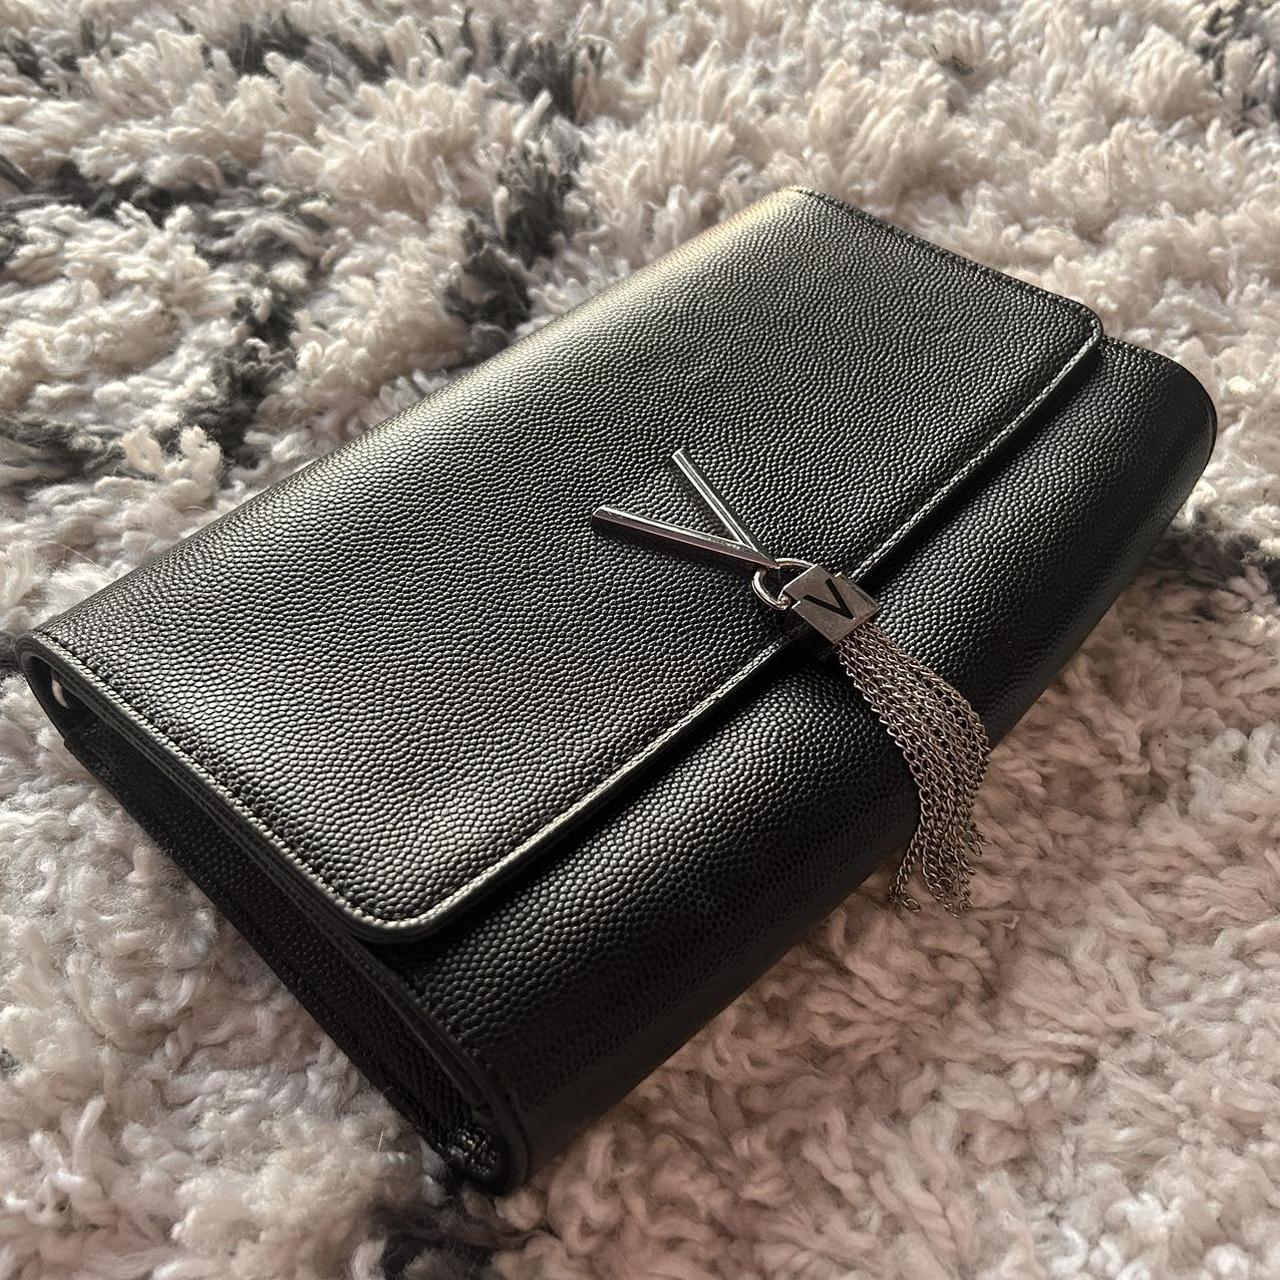 Valentino clutch bag without chain strap🖤 ... - Depop